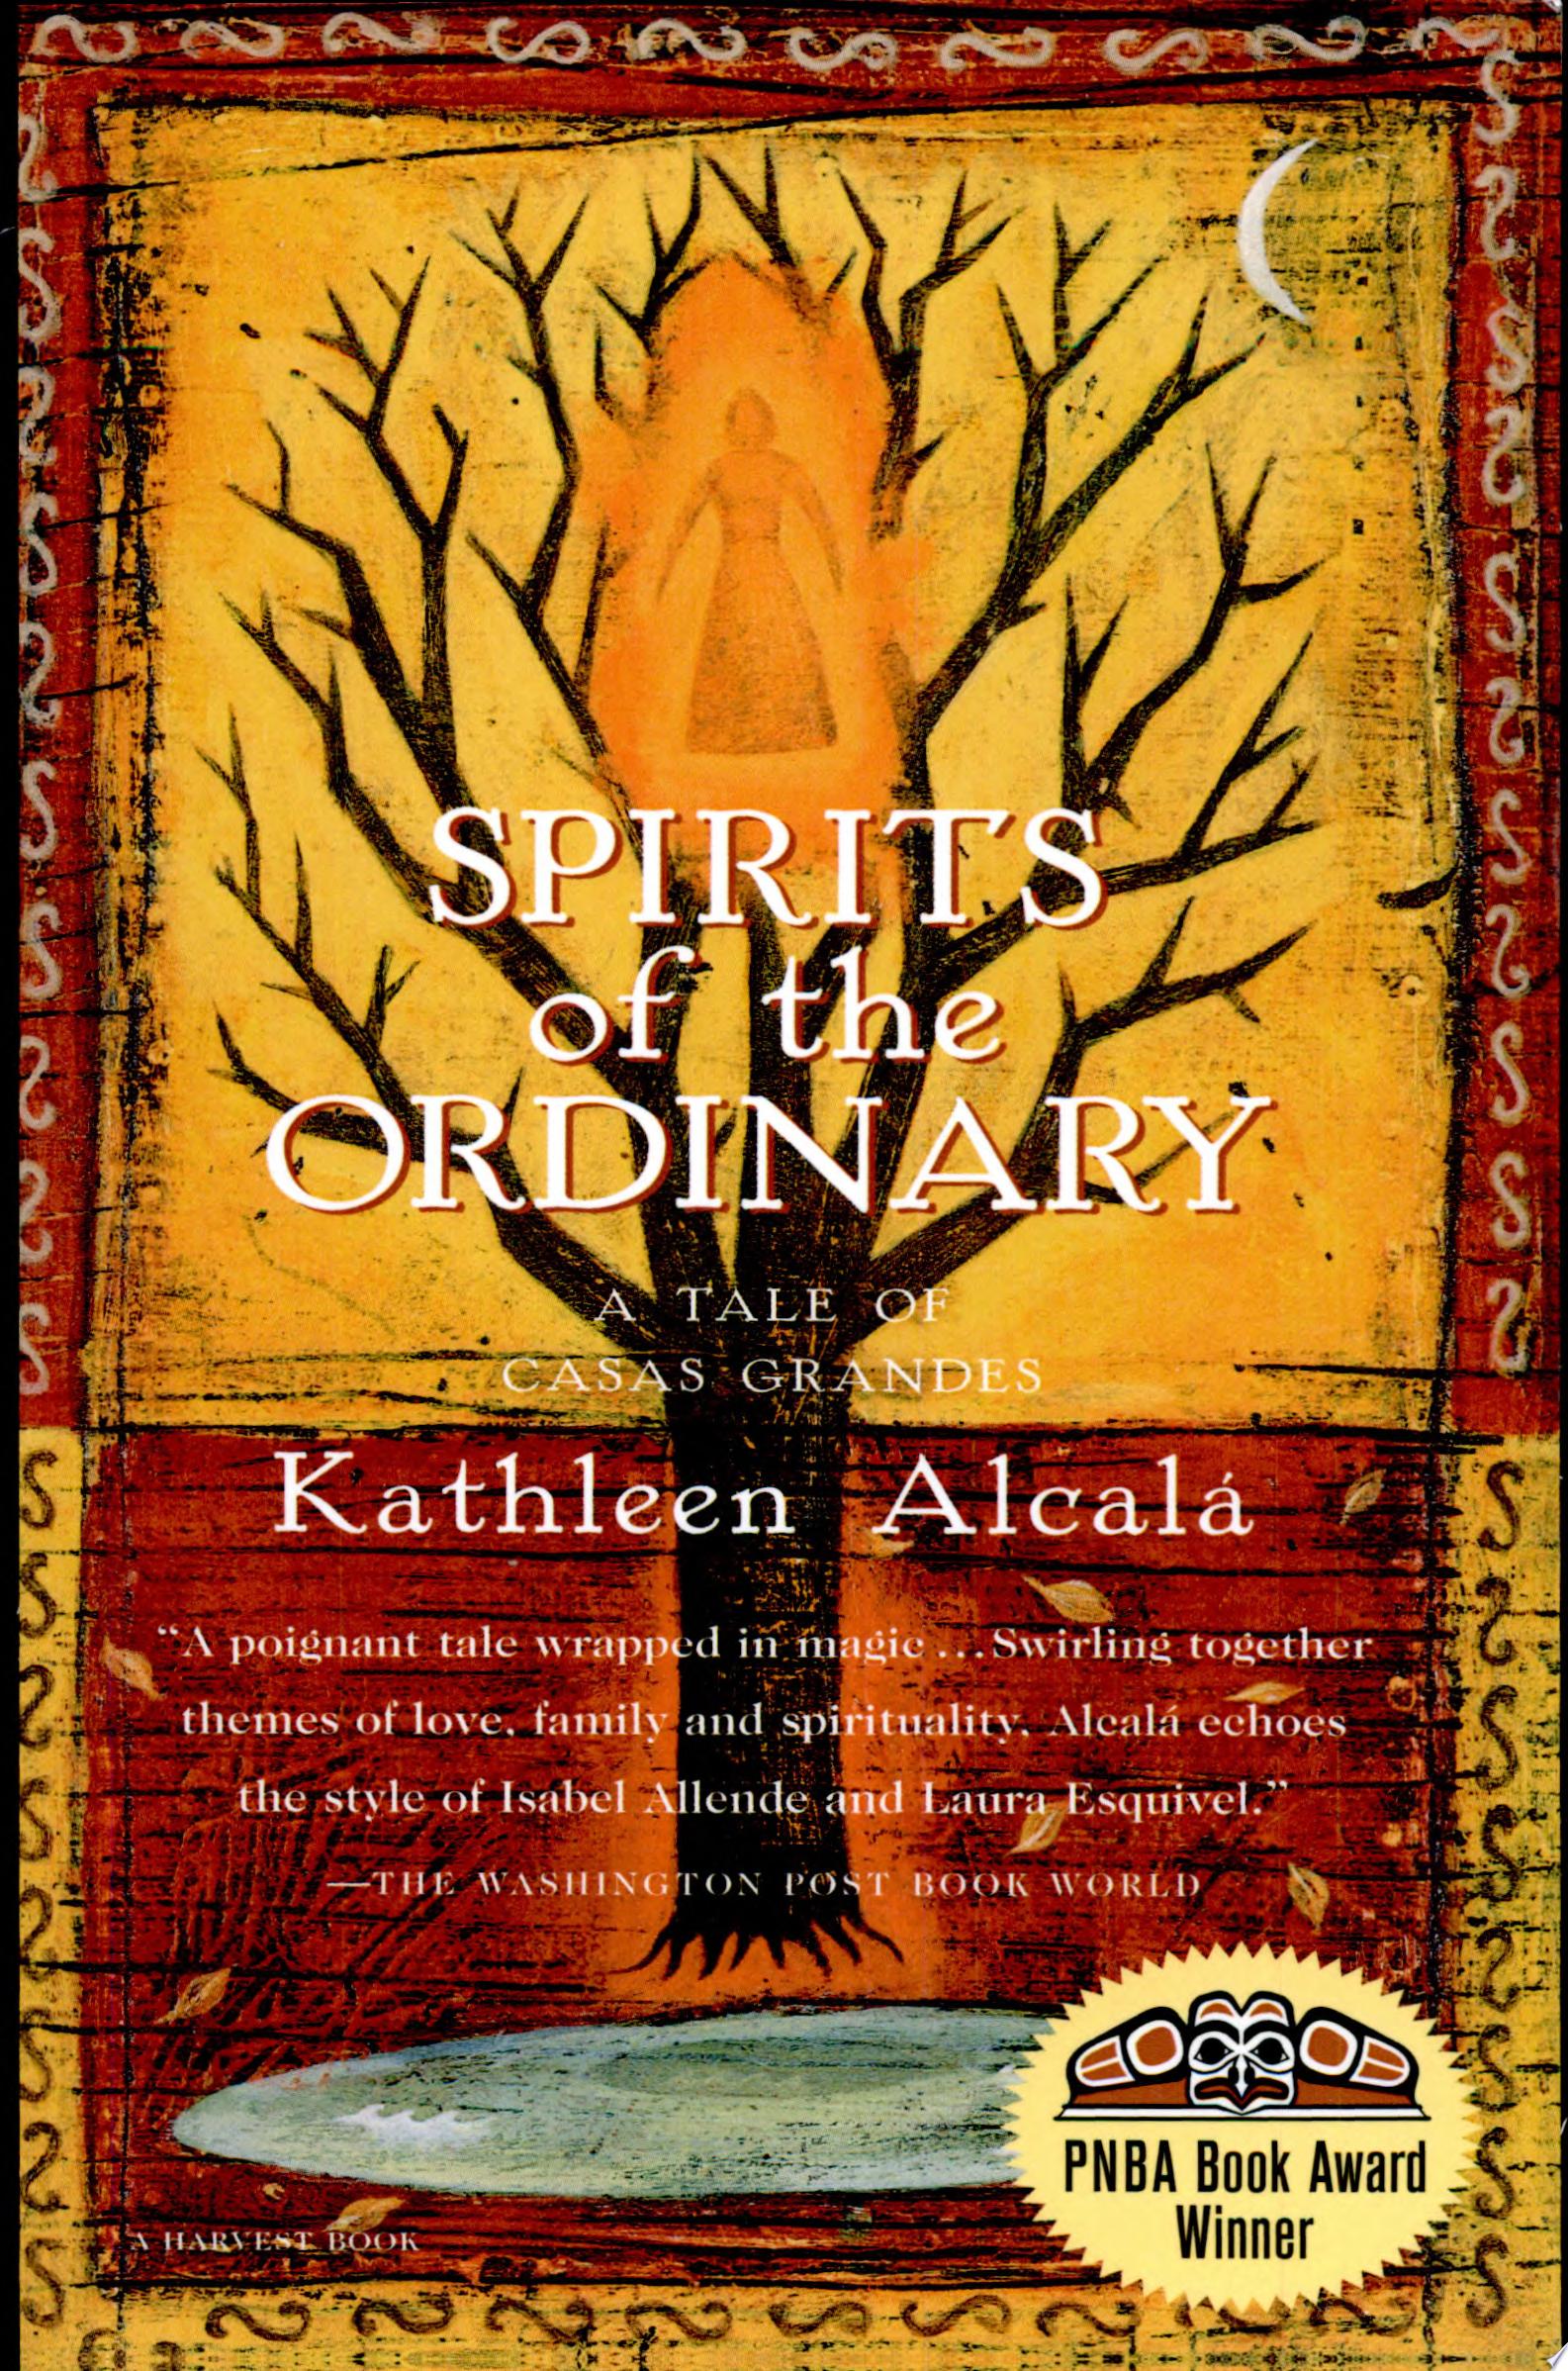 Image for "Spirits of the Ordinary"